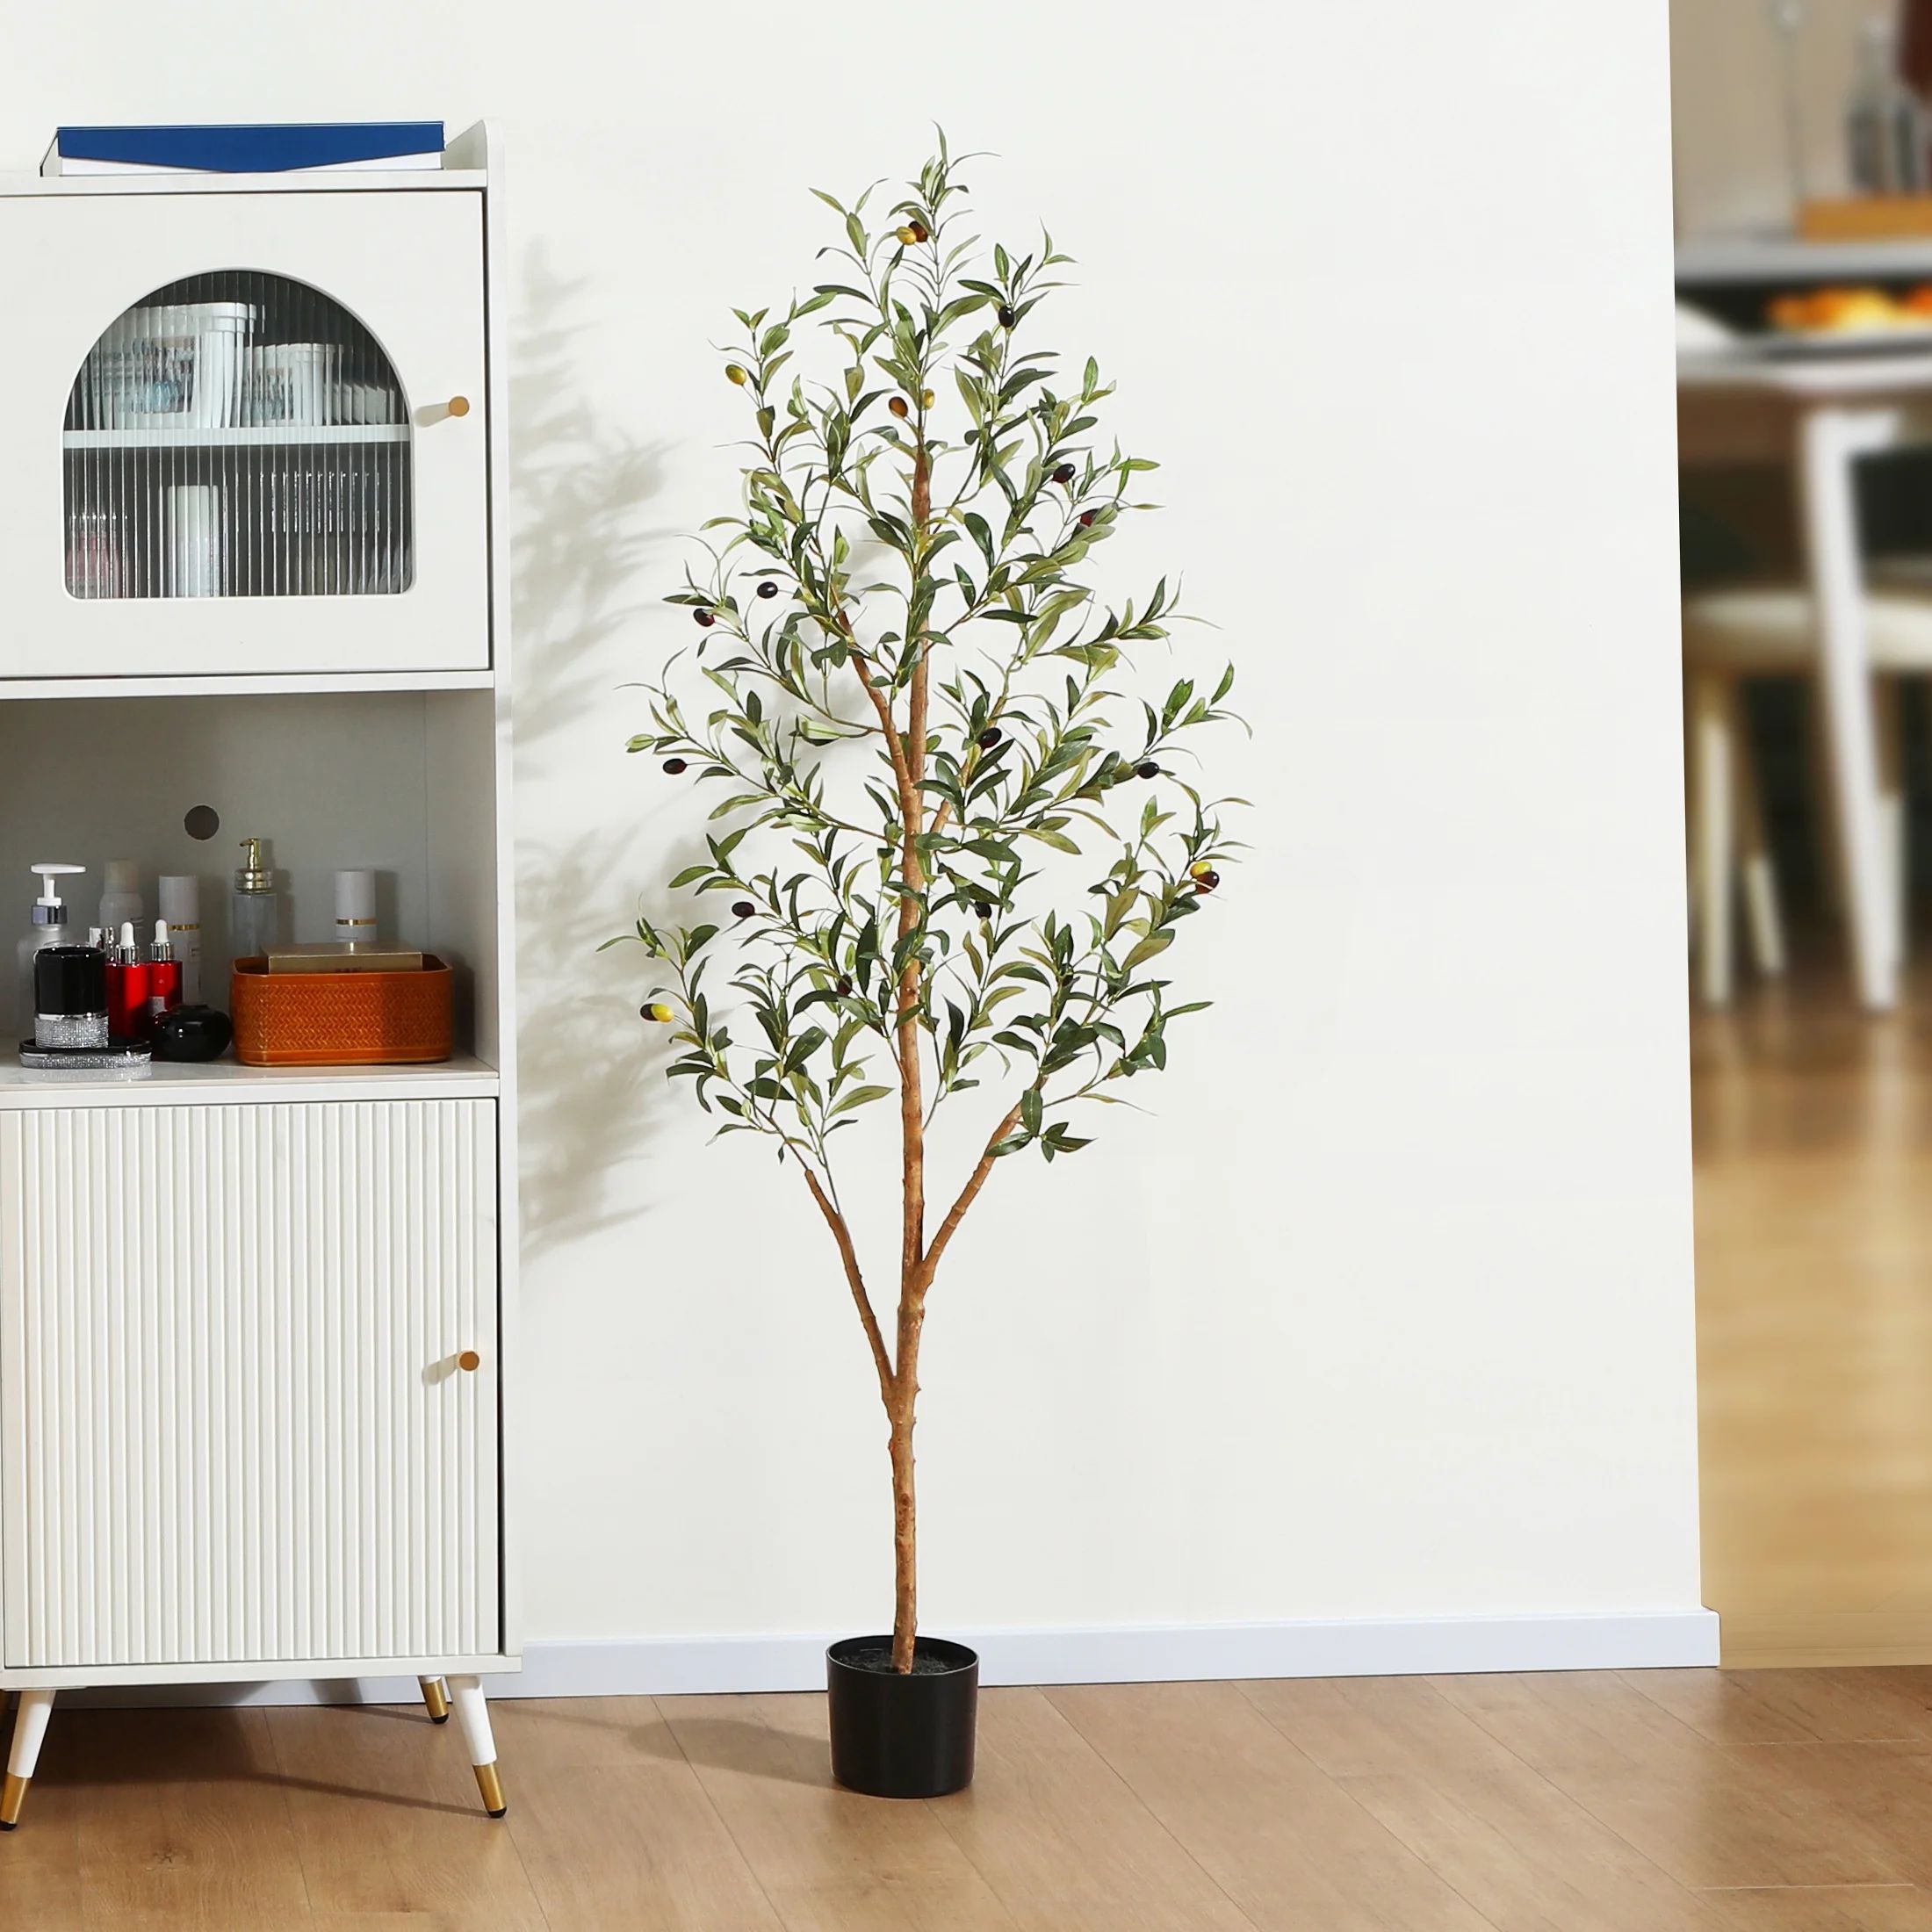 5 ft Artificial Olive Plants with Realistic Leaves and Natural Trunk, Silk Fake Potted Tree with ... | Walmart (US)